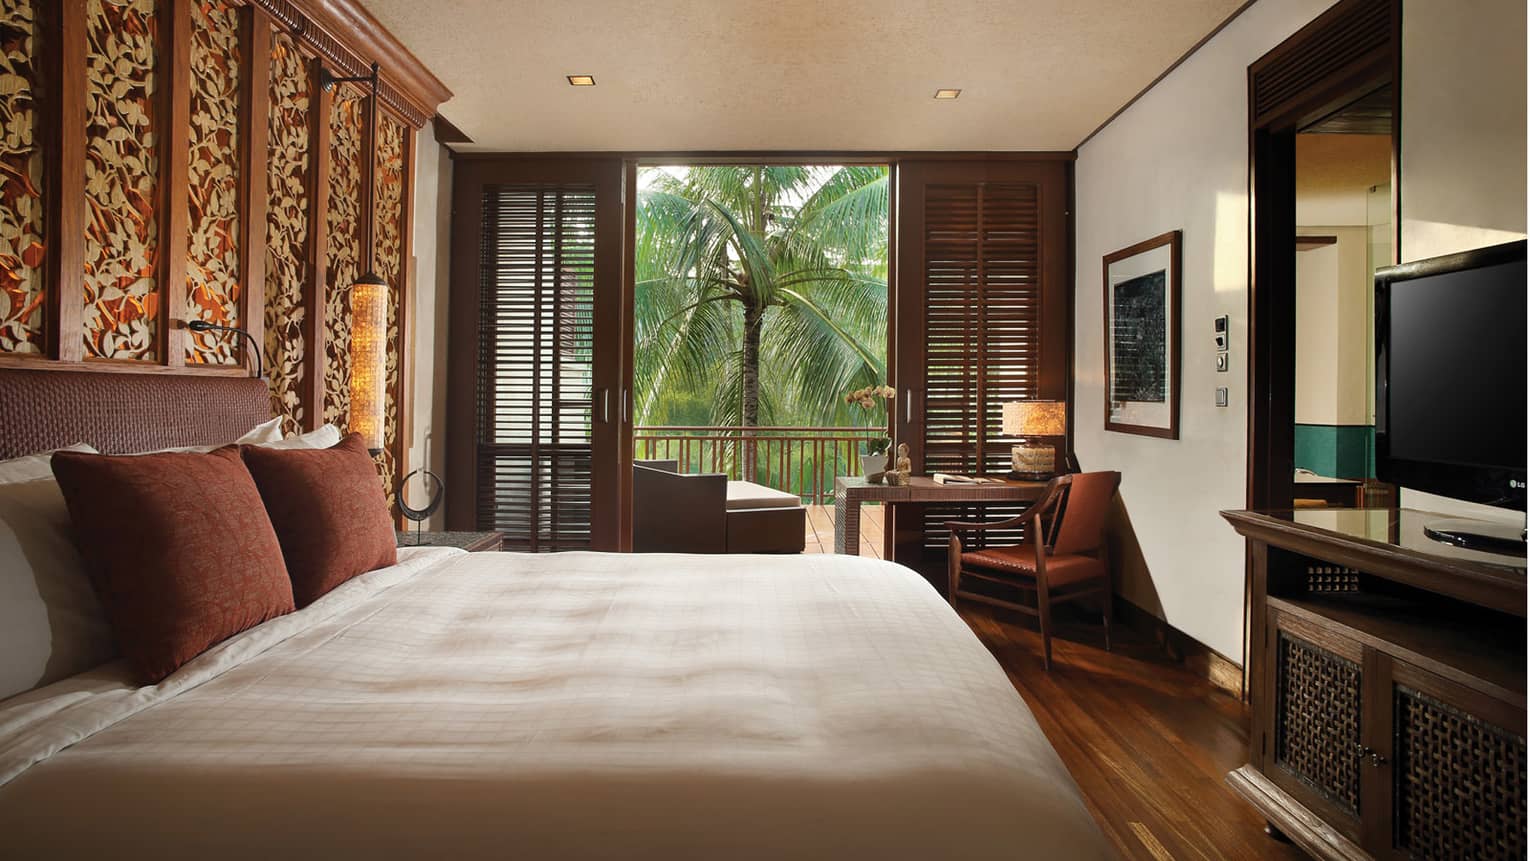 Family Suite bedroom with king-size bed, brown pillows, TV, wood shutters opening to patio with palm tree